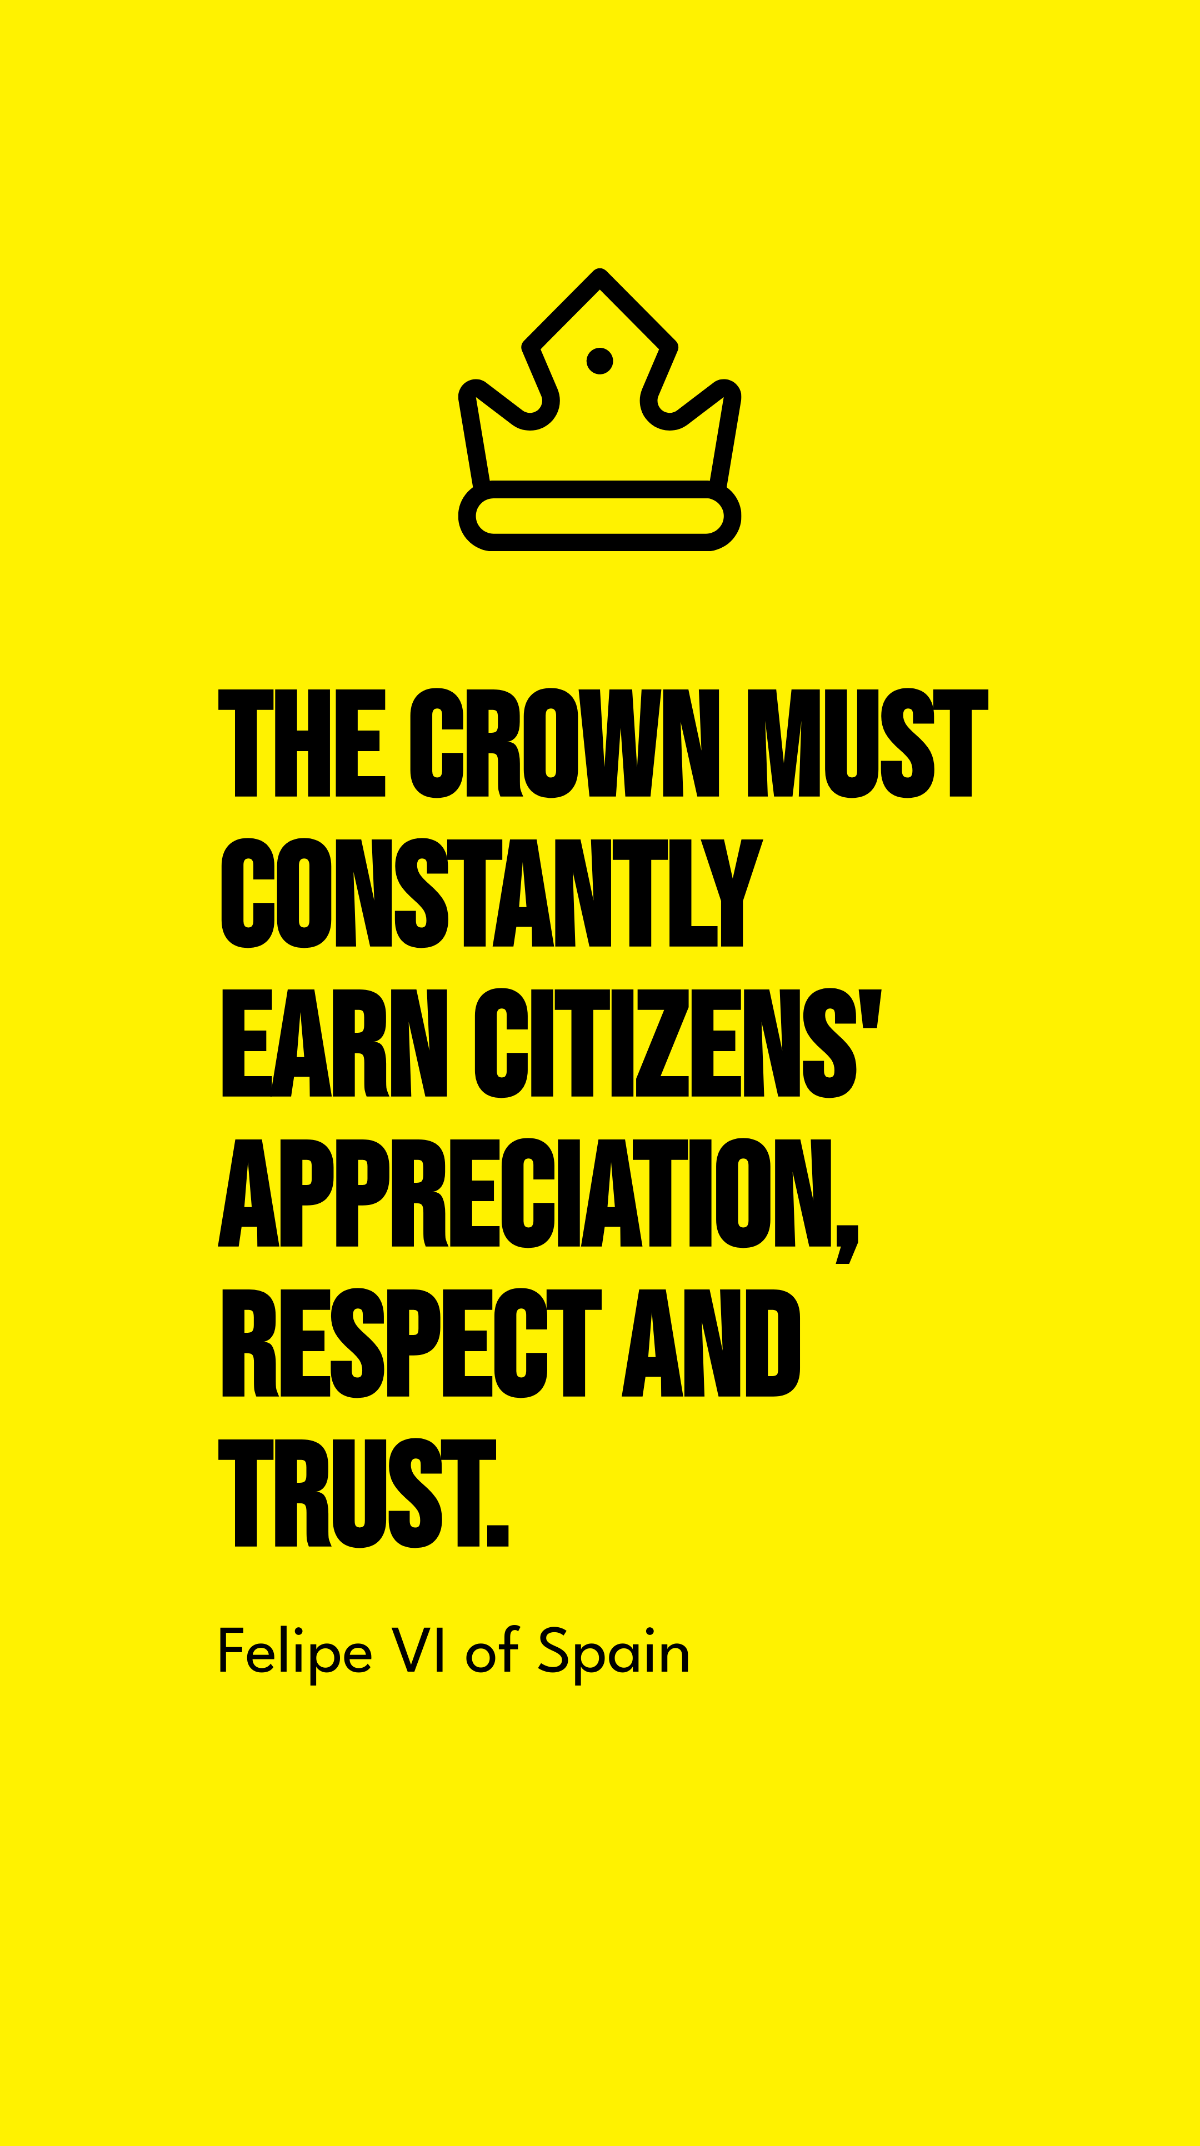 Free Felipe VI of Spain - The crown must constantly earn citizens' appreciation, respect and trust. Template